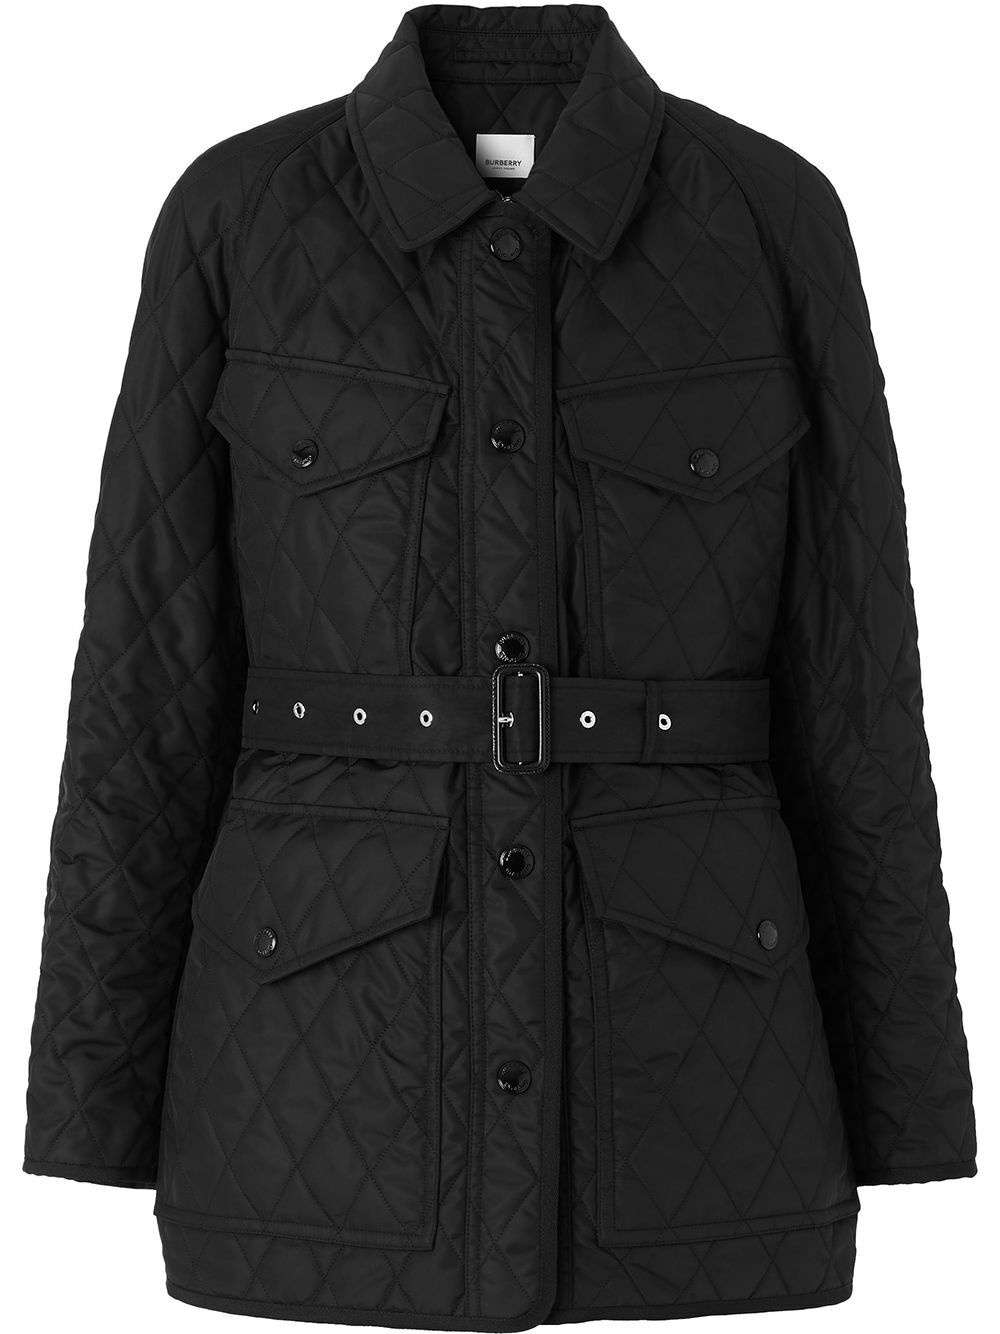 BURBERRY - Quilted Short Jacket Burberry